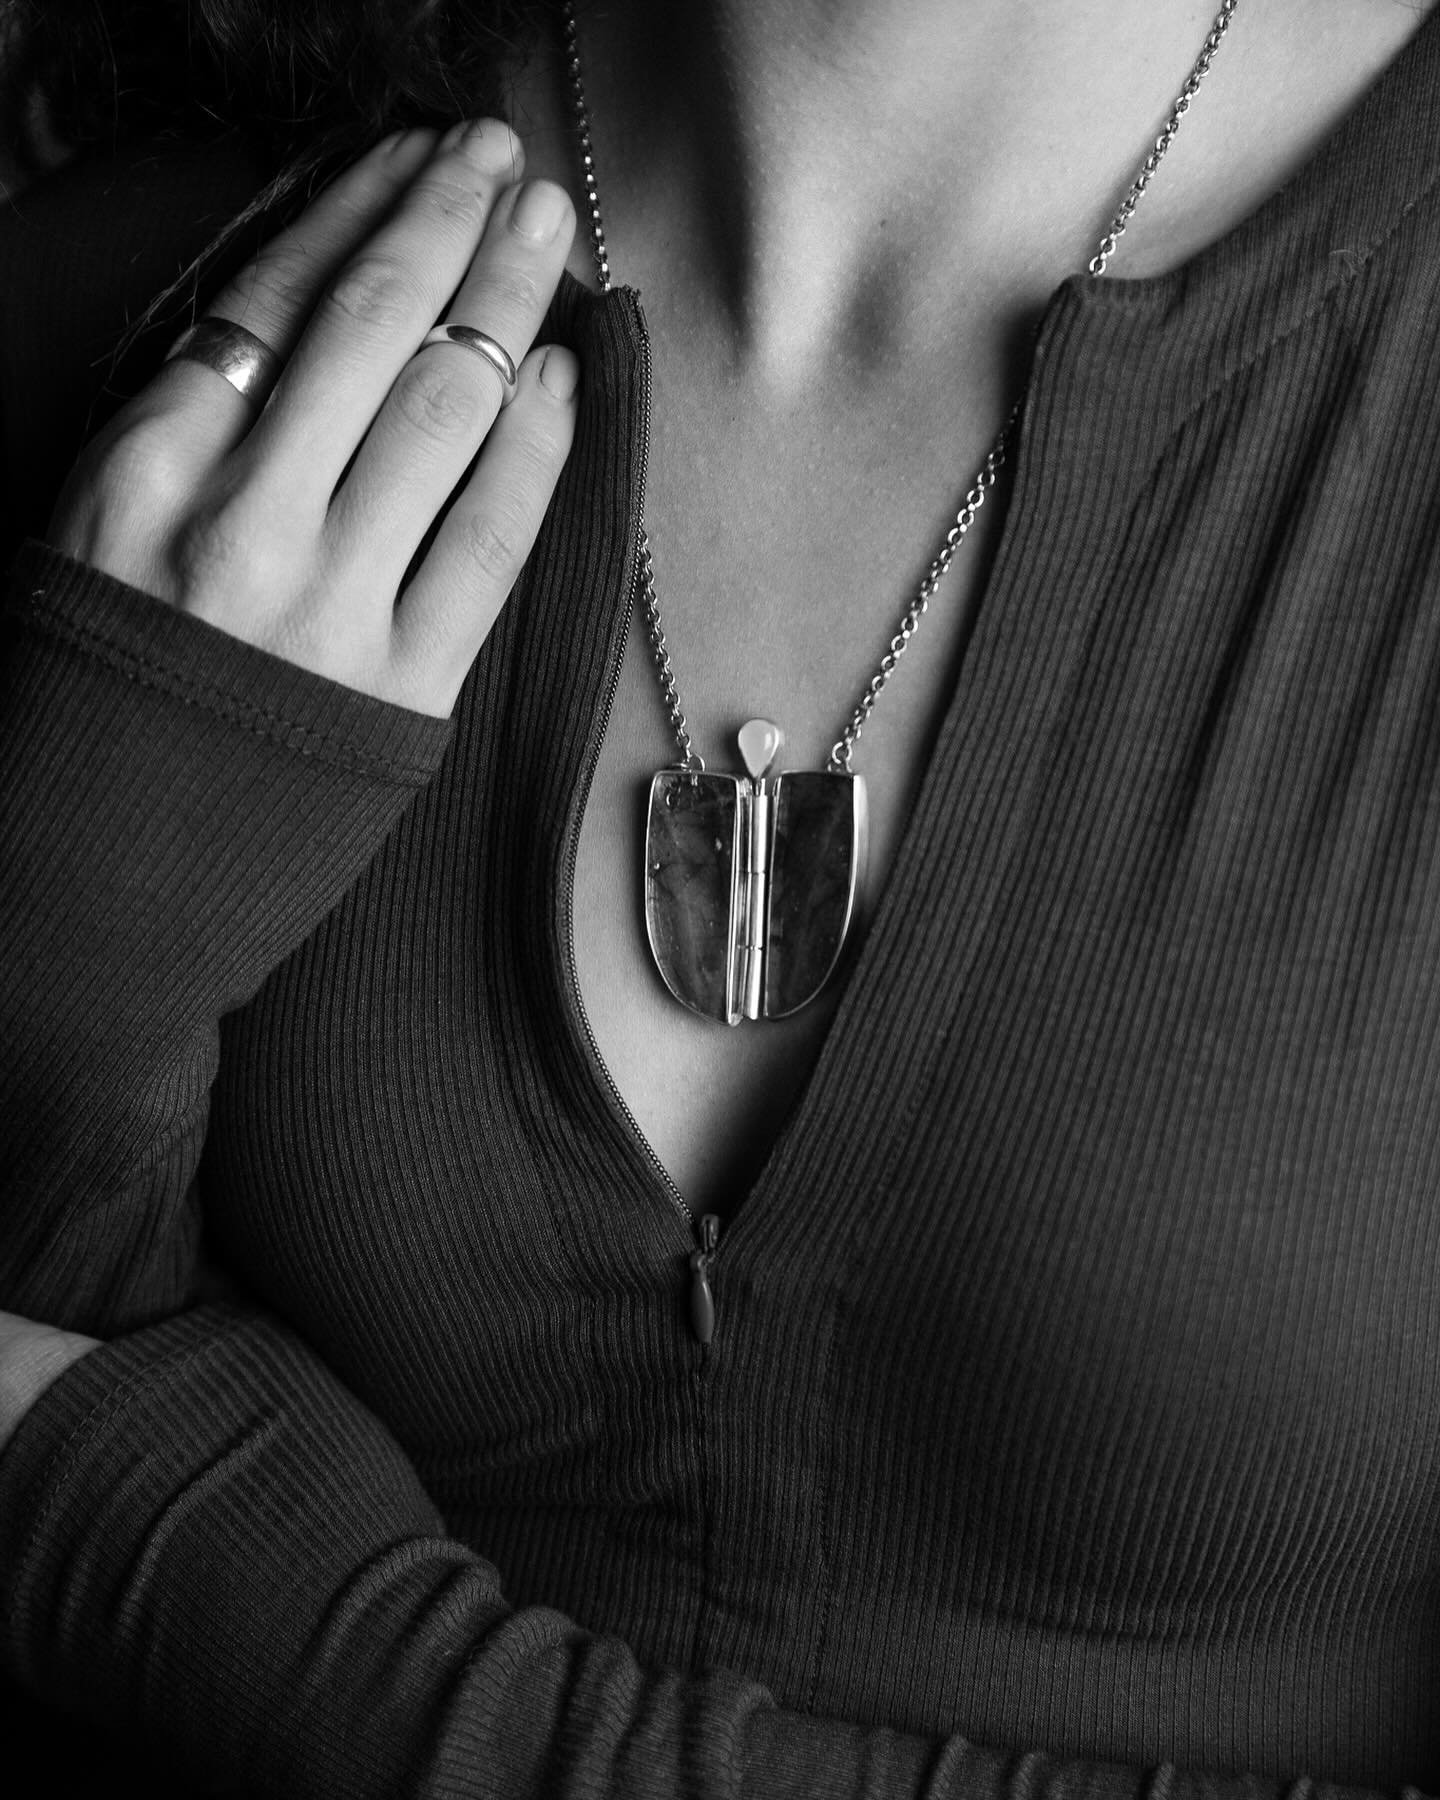 In B&amp;W to showcase the mechanics //
&bull;
I just really love these! I loved making them, and I really love wearing them. While I adore the stones from the necklaces, I think my favorite part is their functionality with the pin clasp in the front